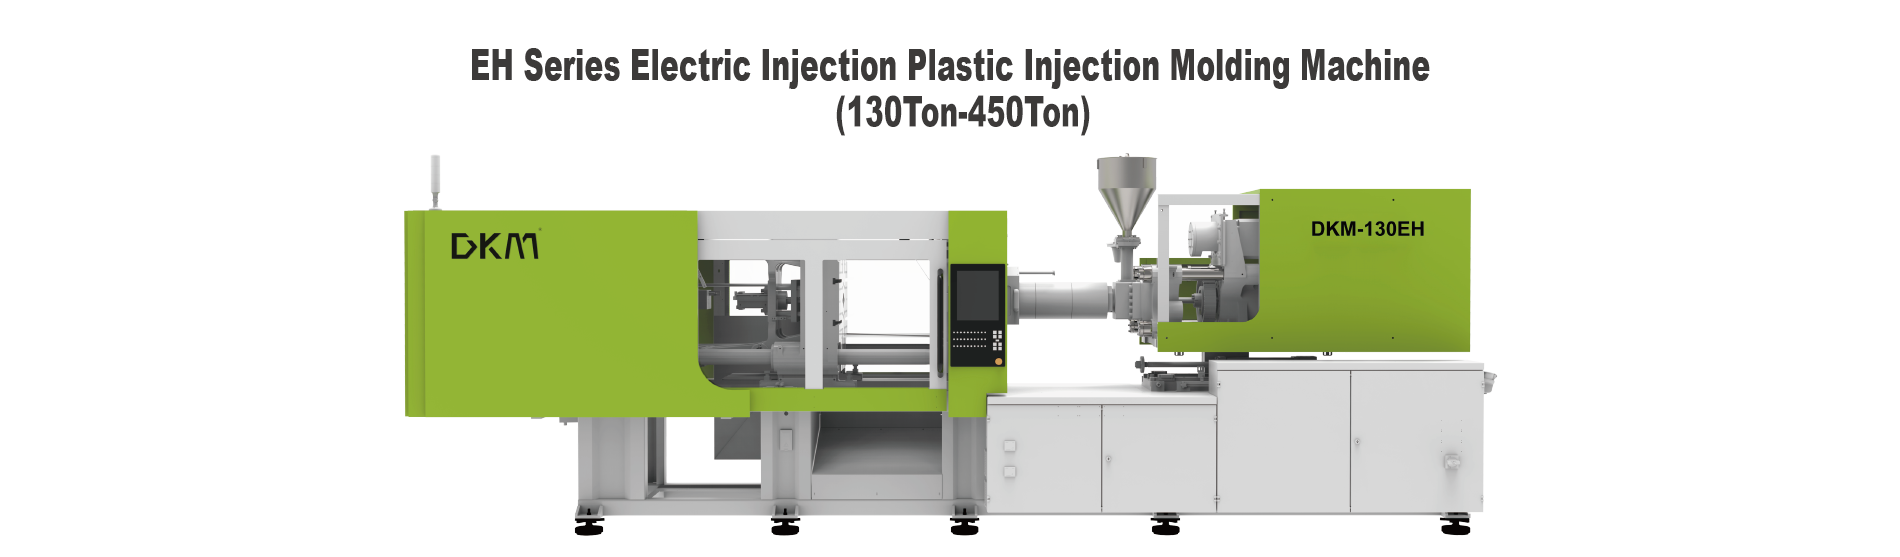 Electric Injection Molding Machine-EH Series